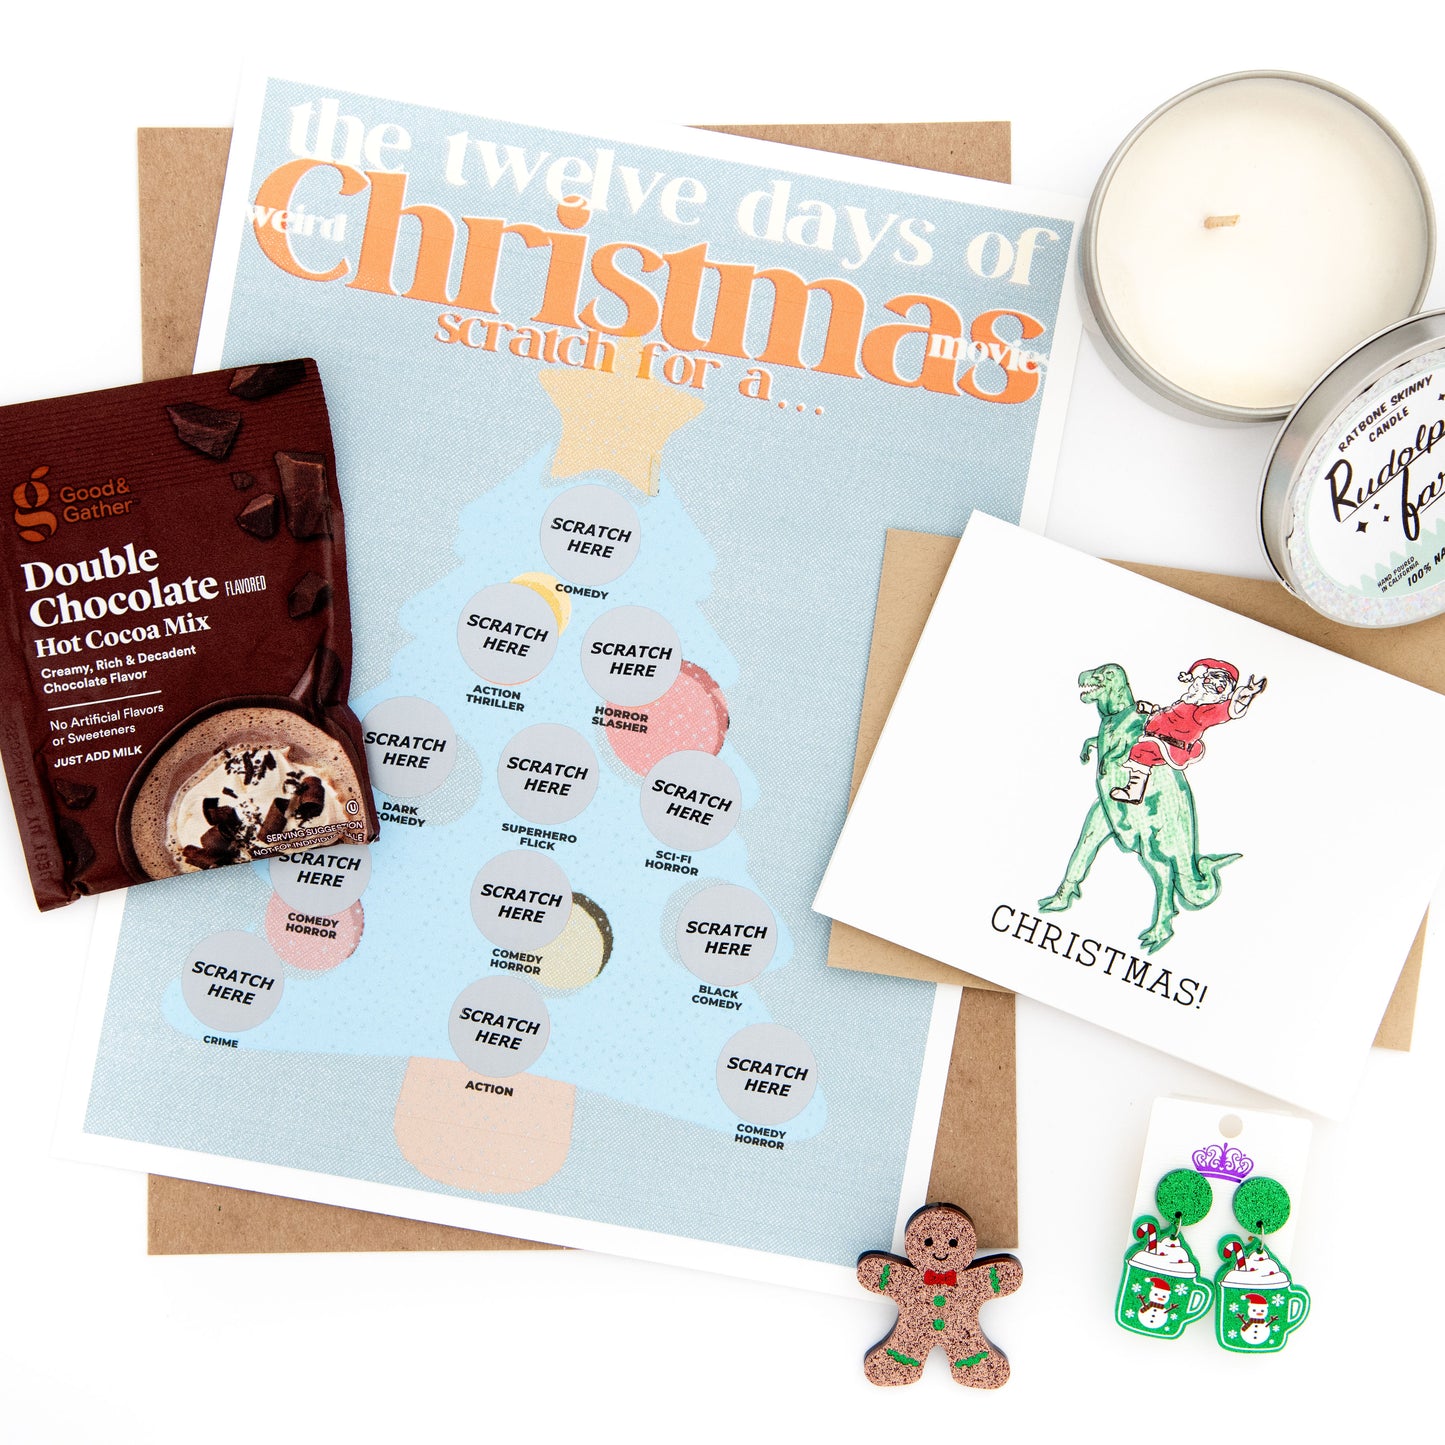 Add some quirky fun to your holiday season with our Weird Christmas Movie-themed subscription box! Scratch off the mystery holiday movie print to reveal your festive movie pick, and enjoy the scent of our Rudolf Farts candle while wearing our festive earrings and gingerbread pin. Don't forget to send holiday greetings with our Christmas card and enjoy a cozy cup of hot cocoa. Order now to experience the perfect blend of holiday cheer and humor.